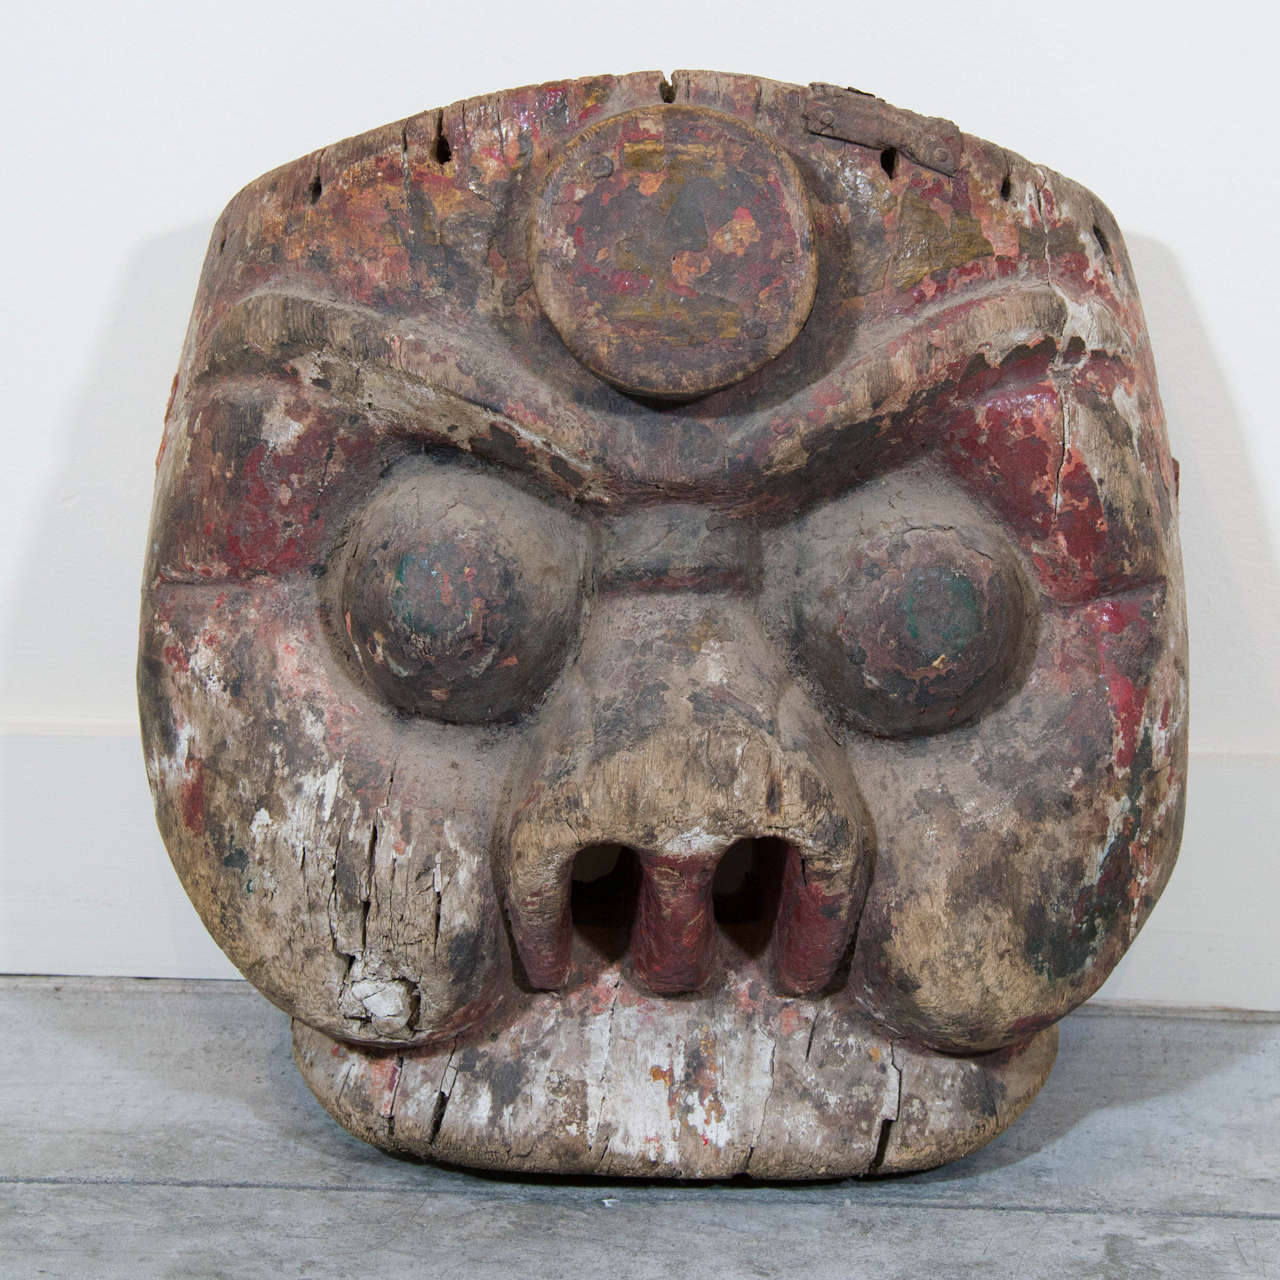 A beautifully carved early 19th Century Chinese mask with traces of original color. From Hunan Province.